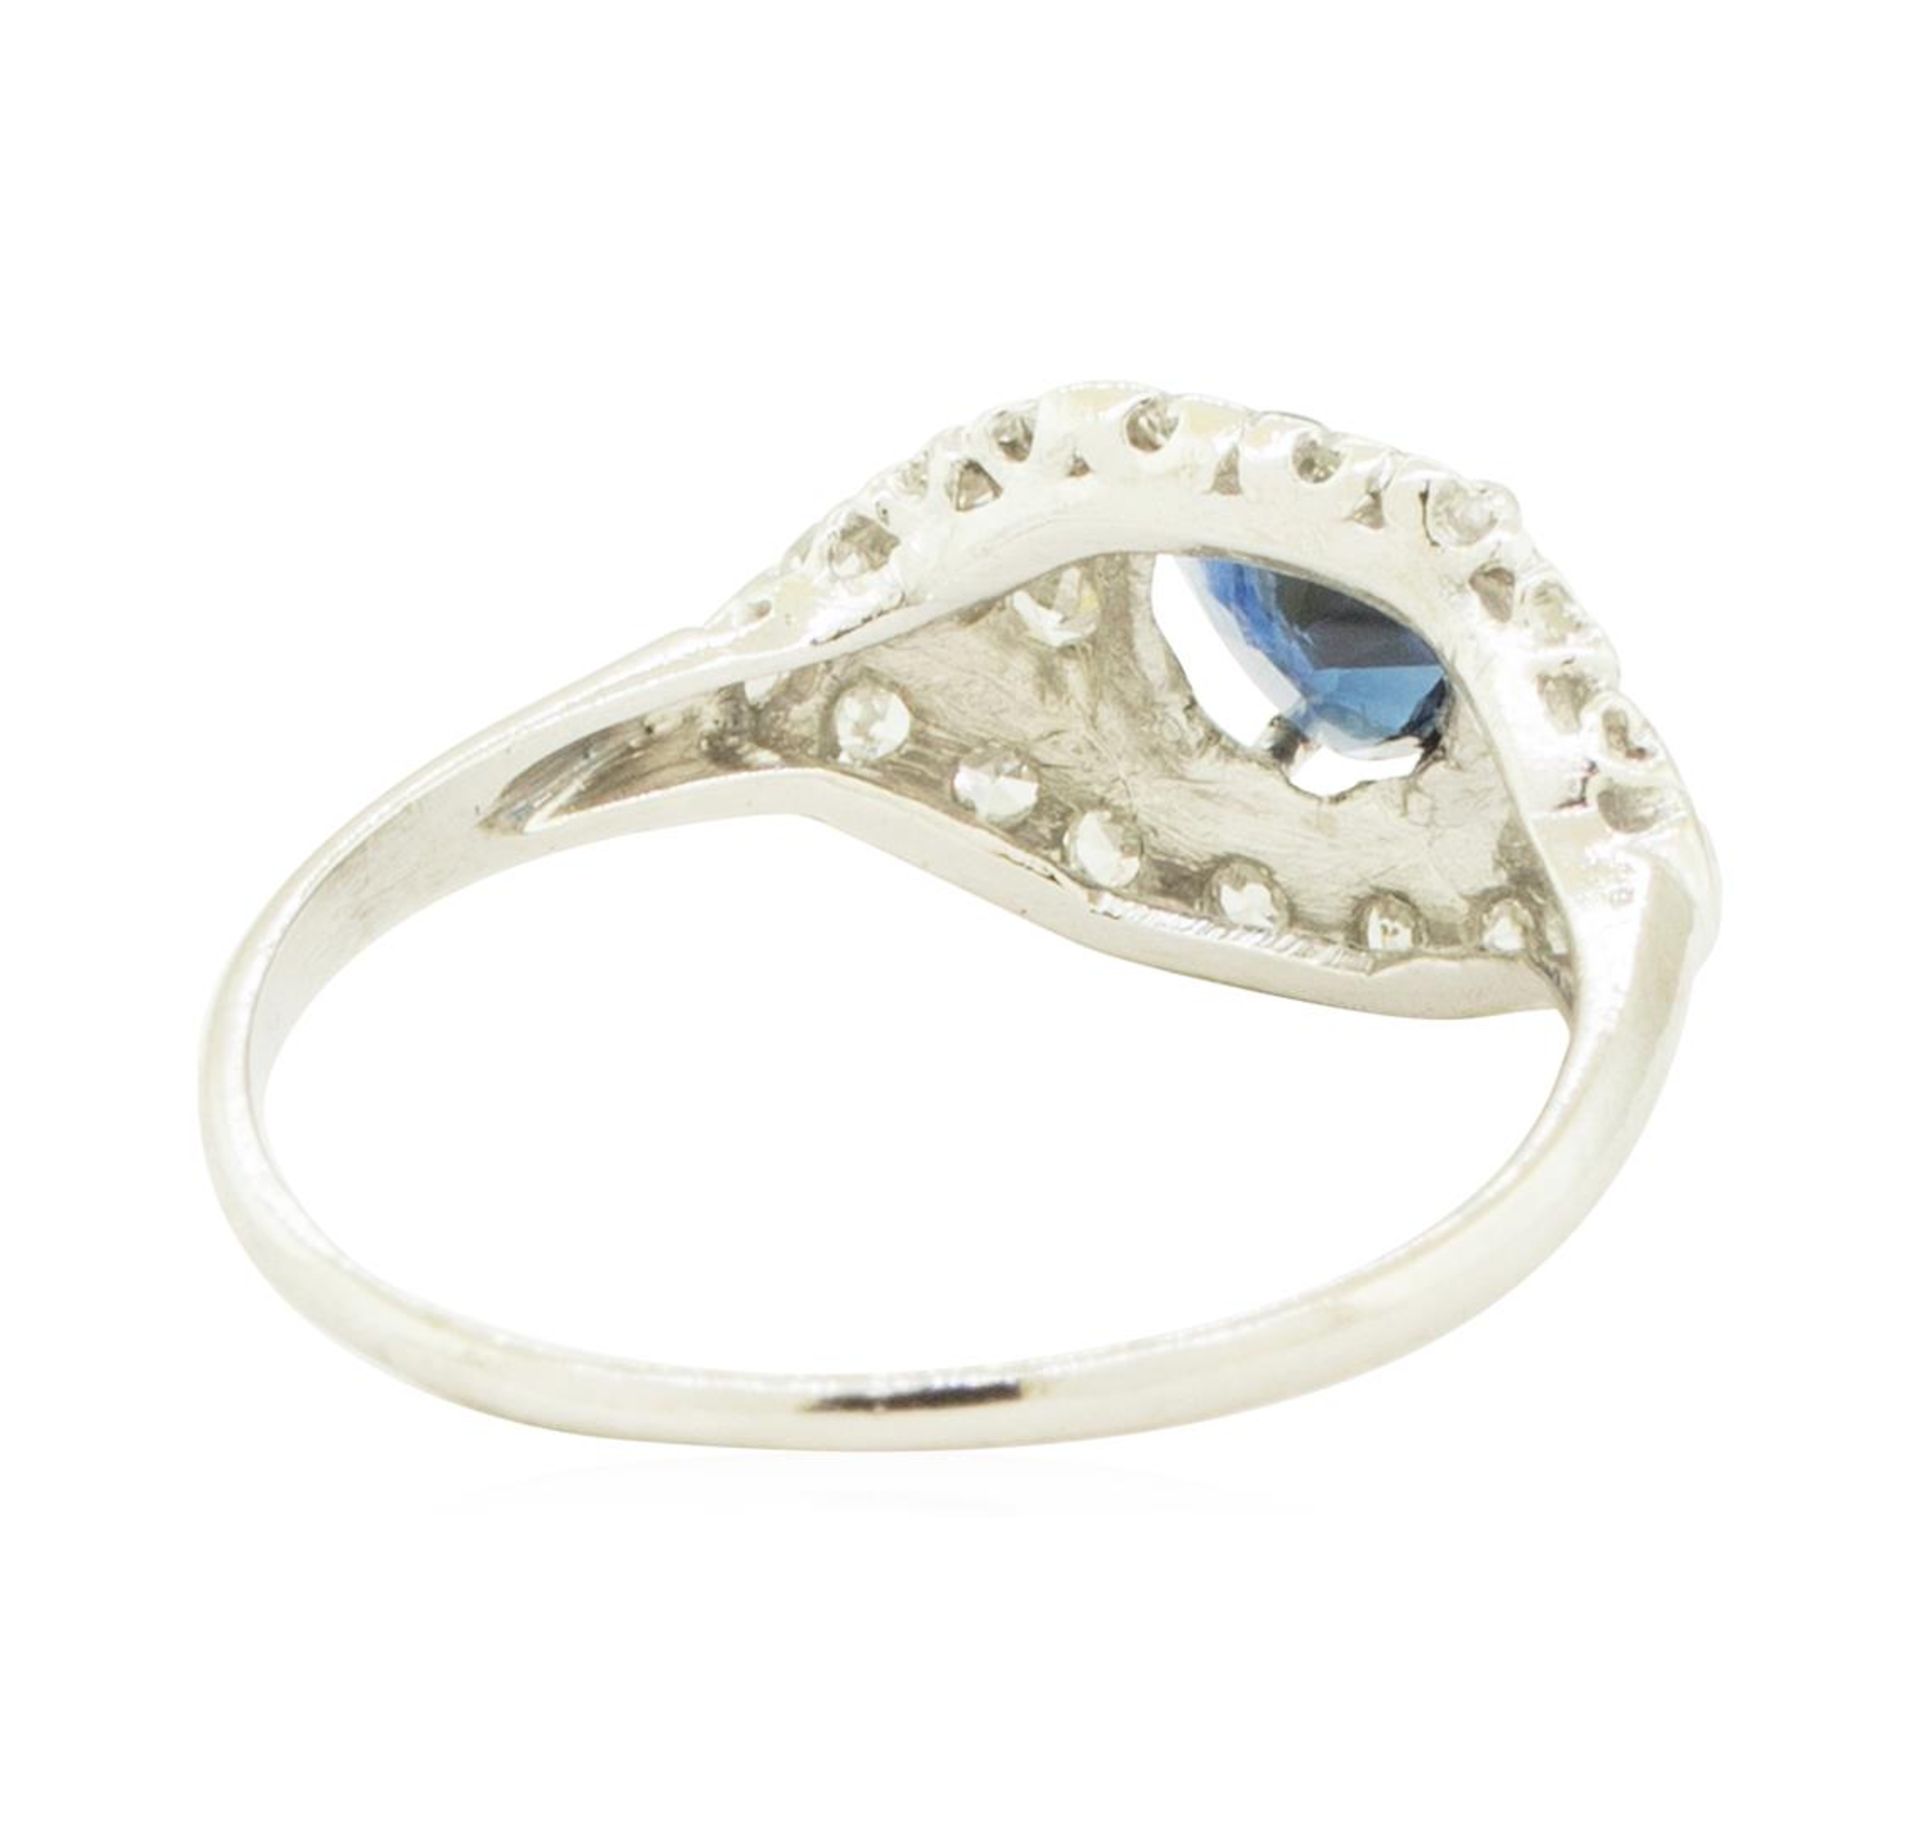 0.40 ctw Diamond and Sapphire Ring - 14KT White Gold - Image 3 of 4